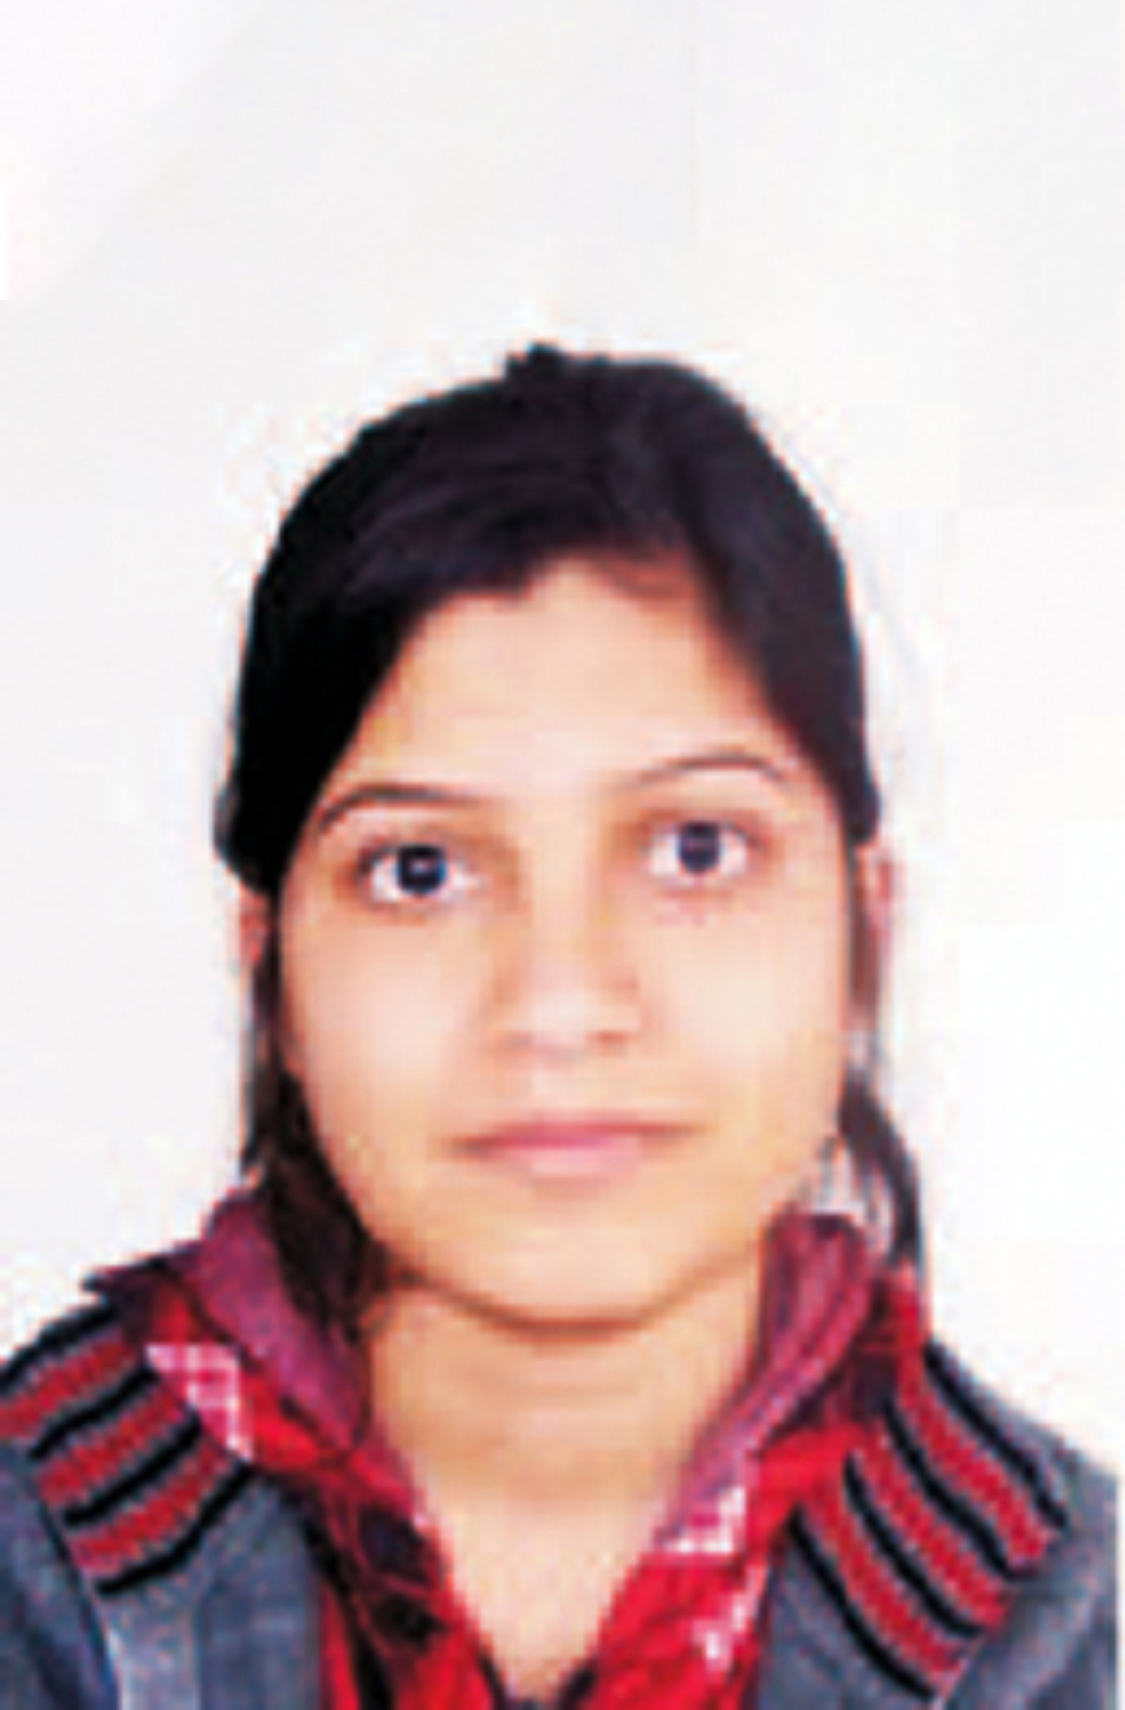 A person named Ishita achieving Rank 3 in the CSIR NET Life Sciences exam June - 2014